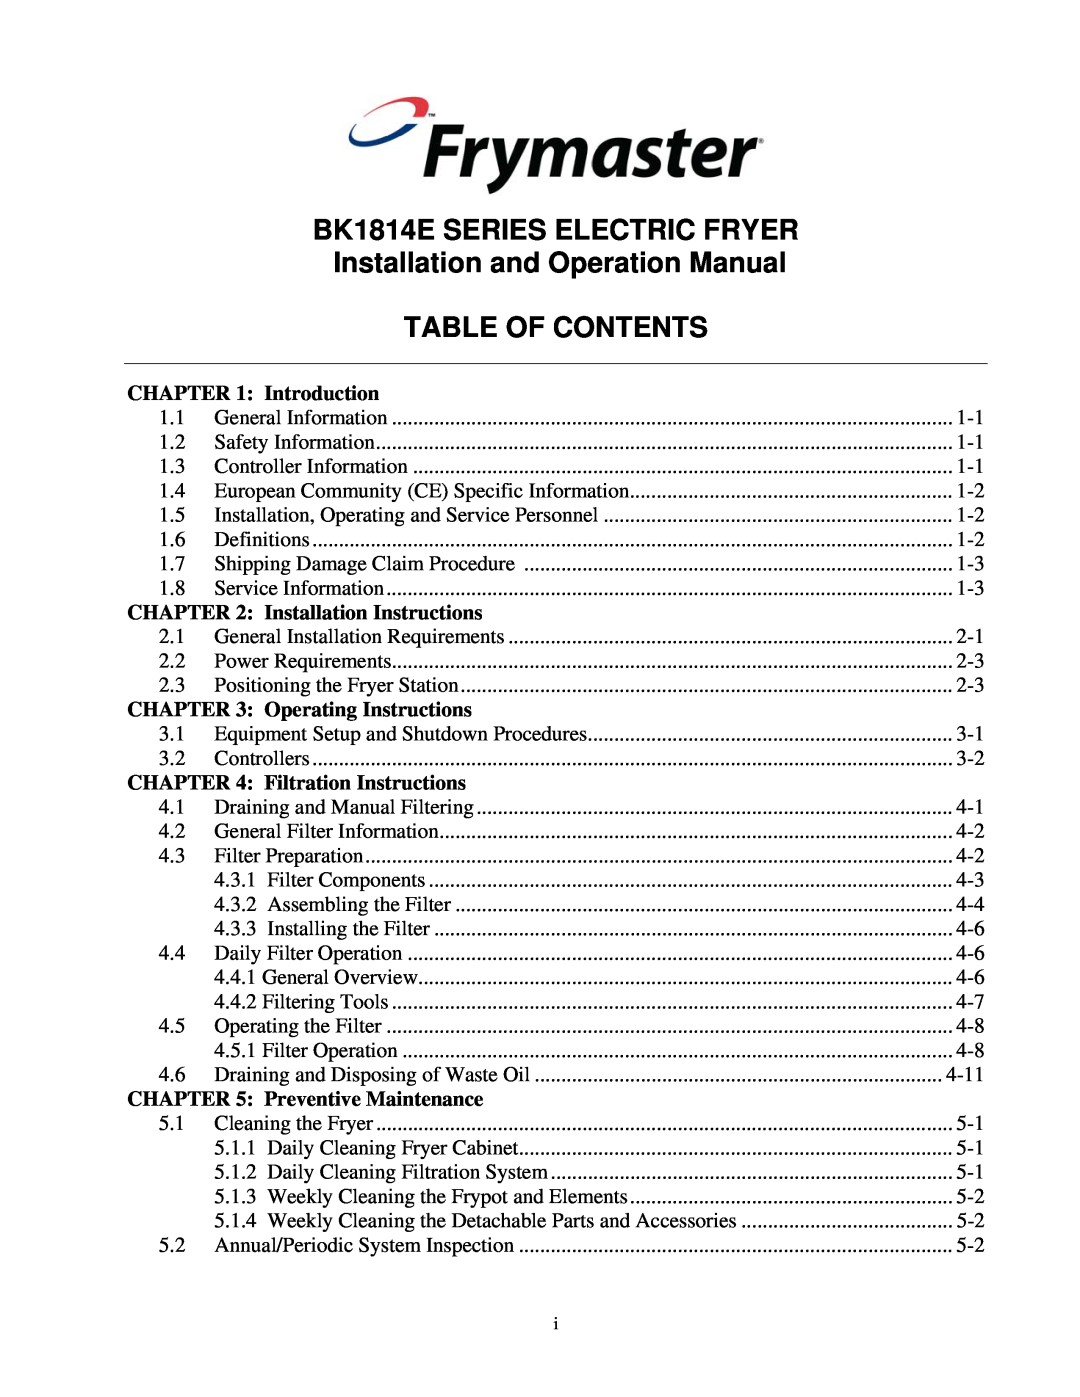 Frymaster BK1814E operation manual Table Of Contents, Introduction, Installation Instructions, Operating Instructions 